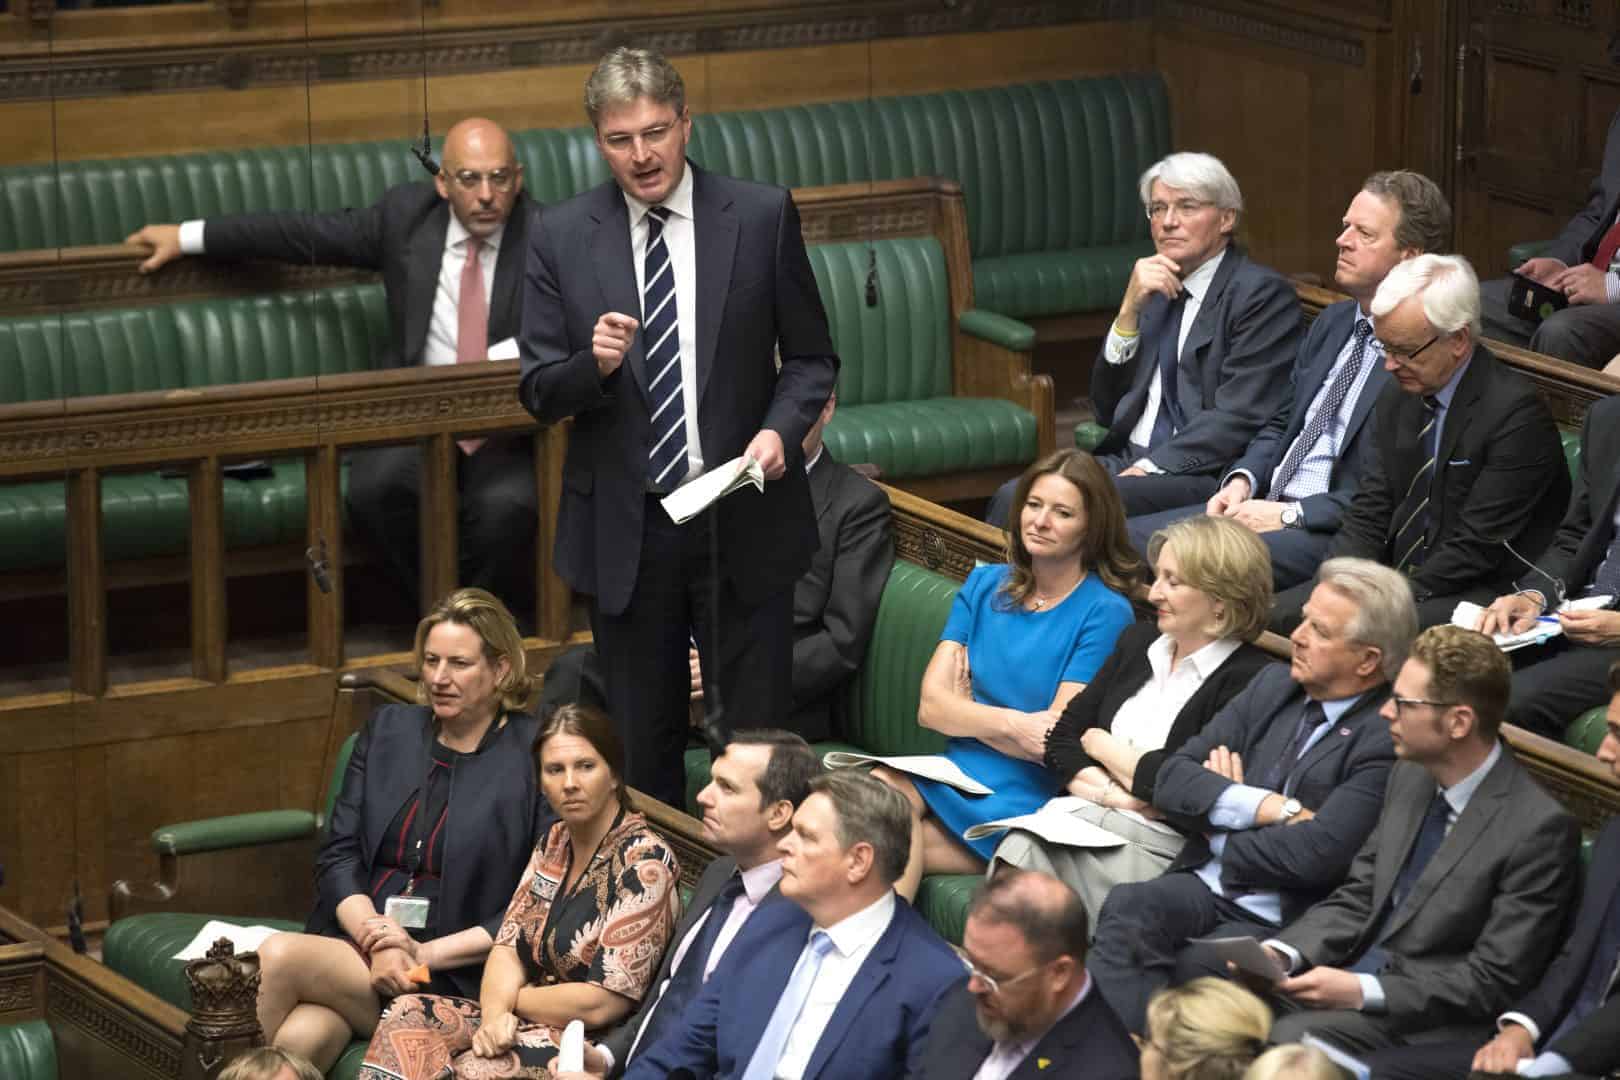 Tory MP criticised by Jewish leaders for appearance with far-right politicians